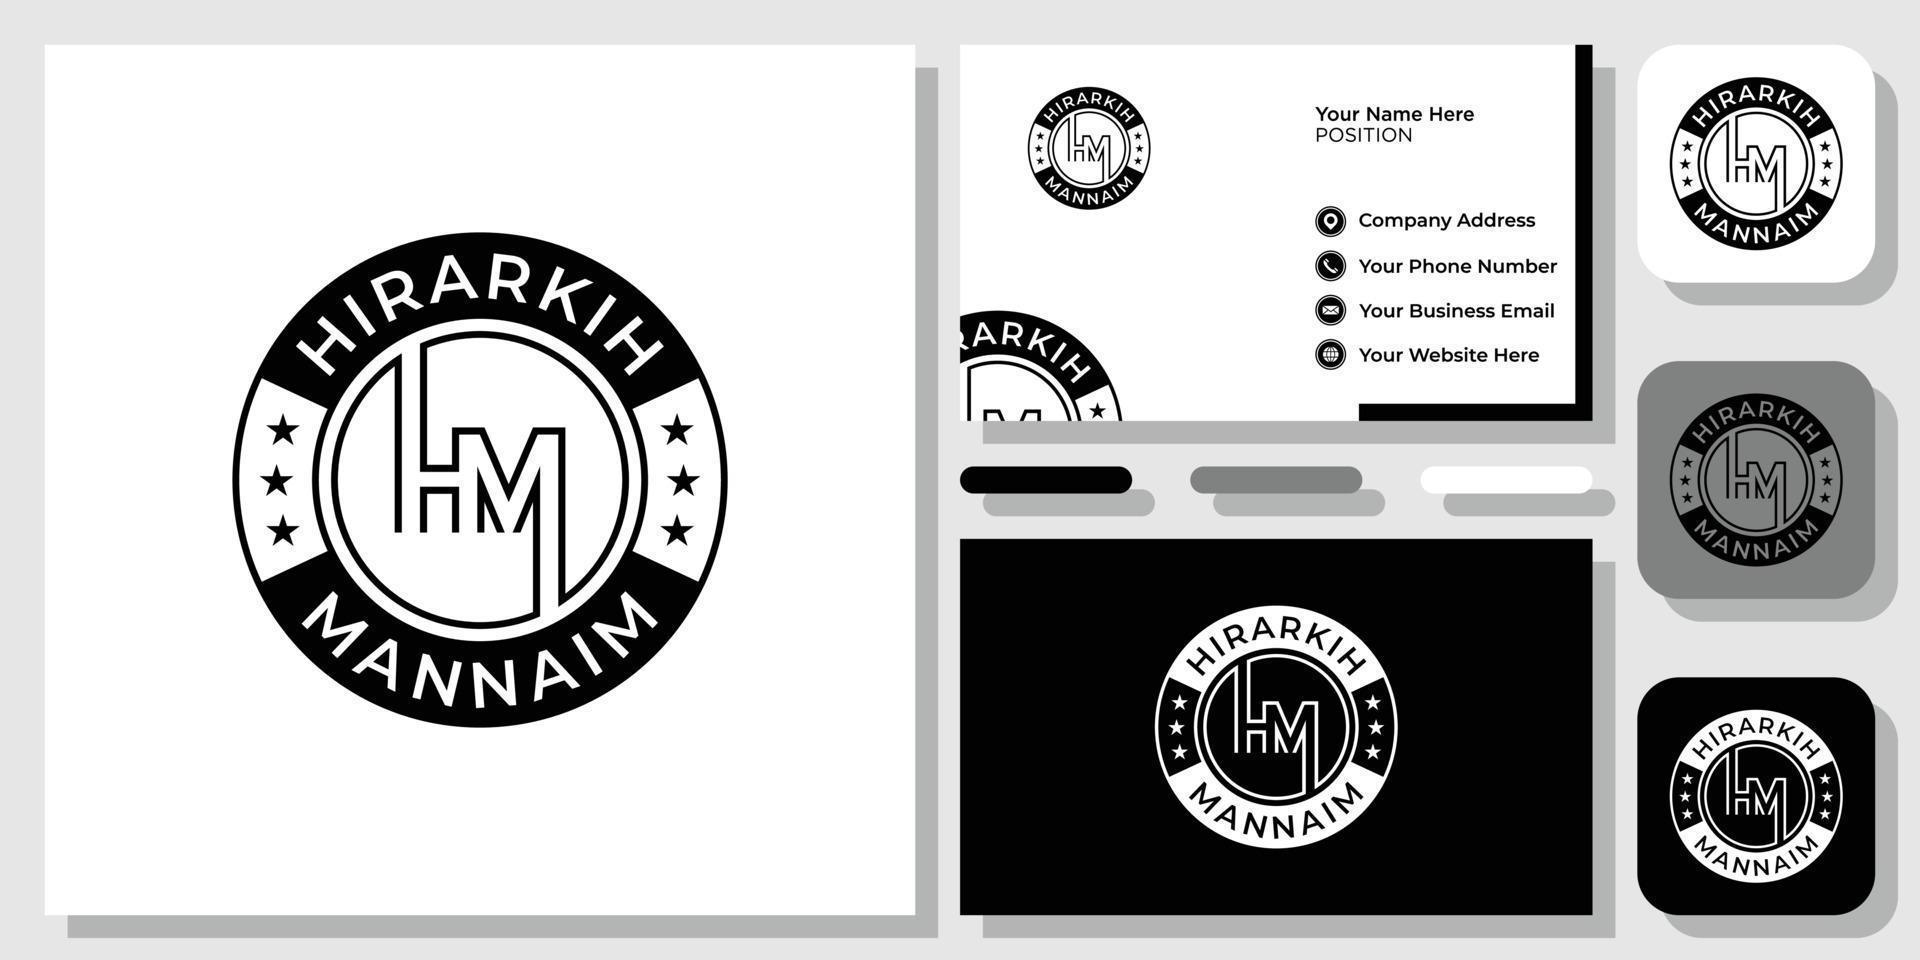 Initials Letter HM MH Monogram Vintage Stamp Circle Label Logo Design with Business Card Template vector